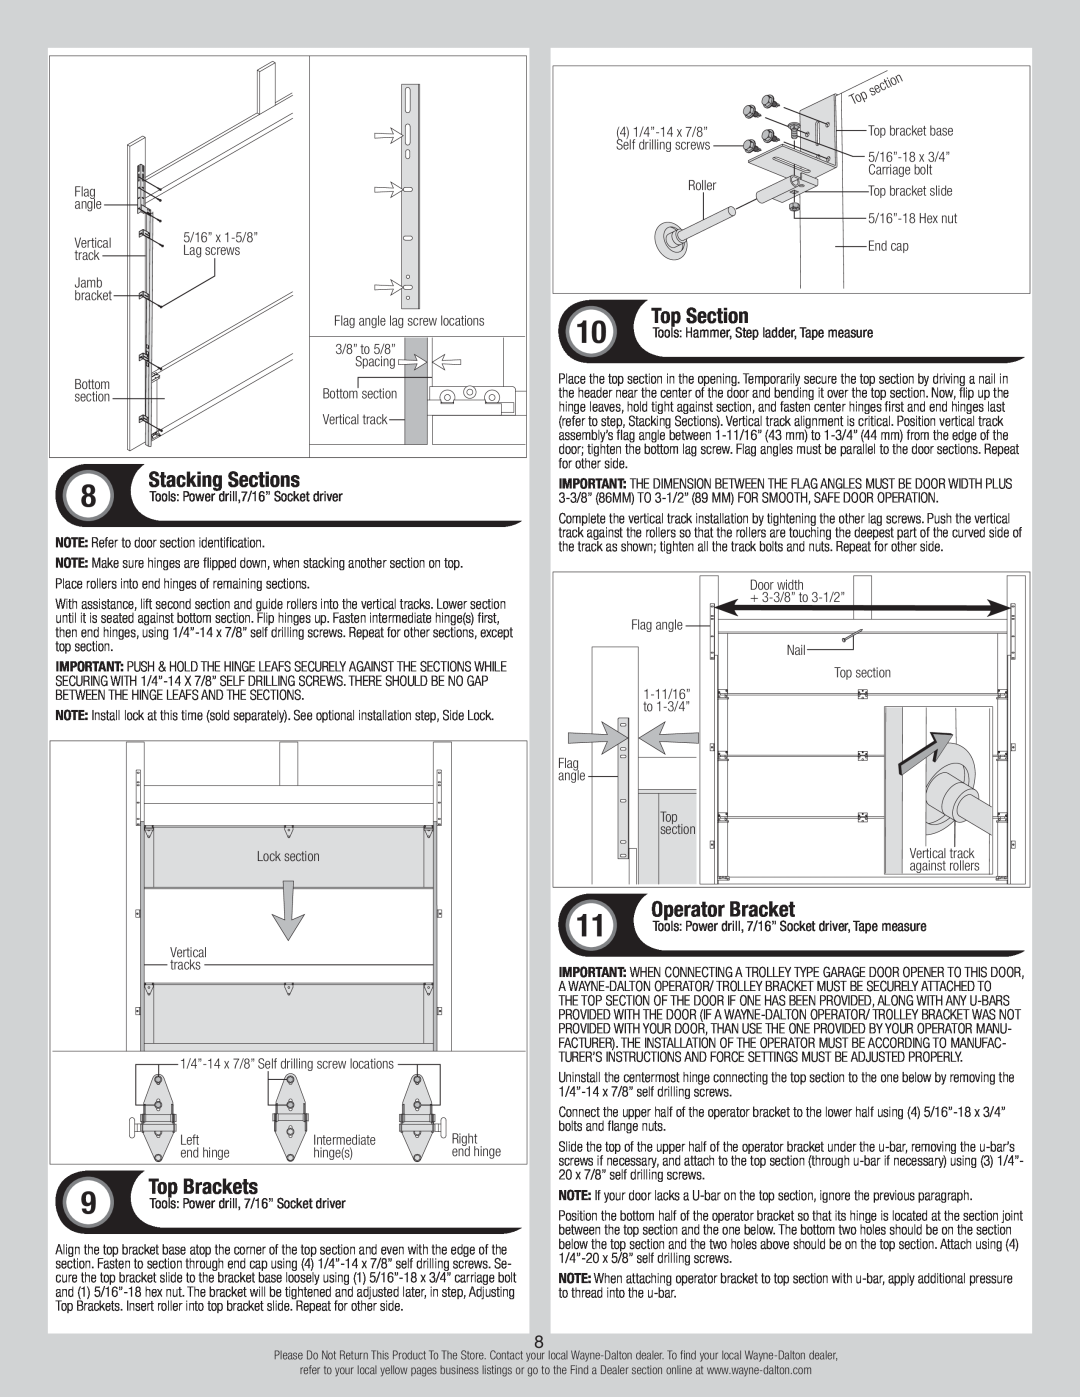 Wayne-Dalton 8300, 8500 installation instructions Stacking Sections, Top Brackets, Top Section, Operator Bracket 